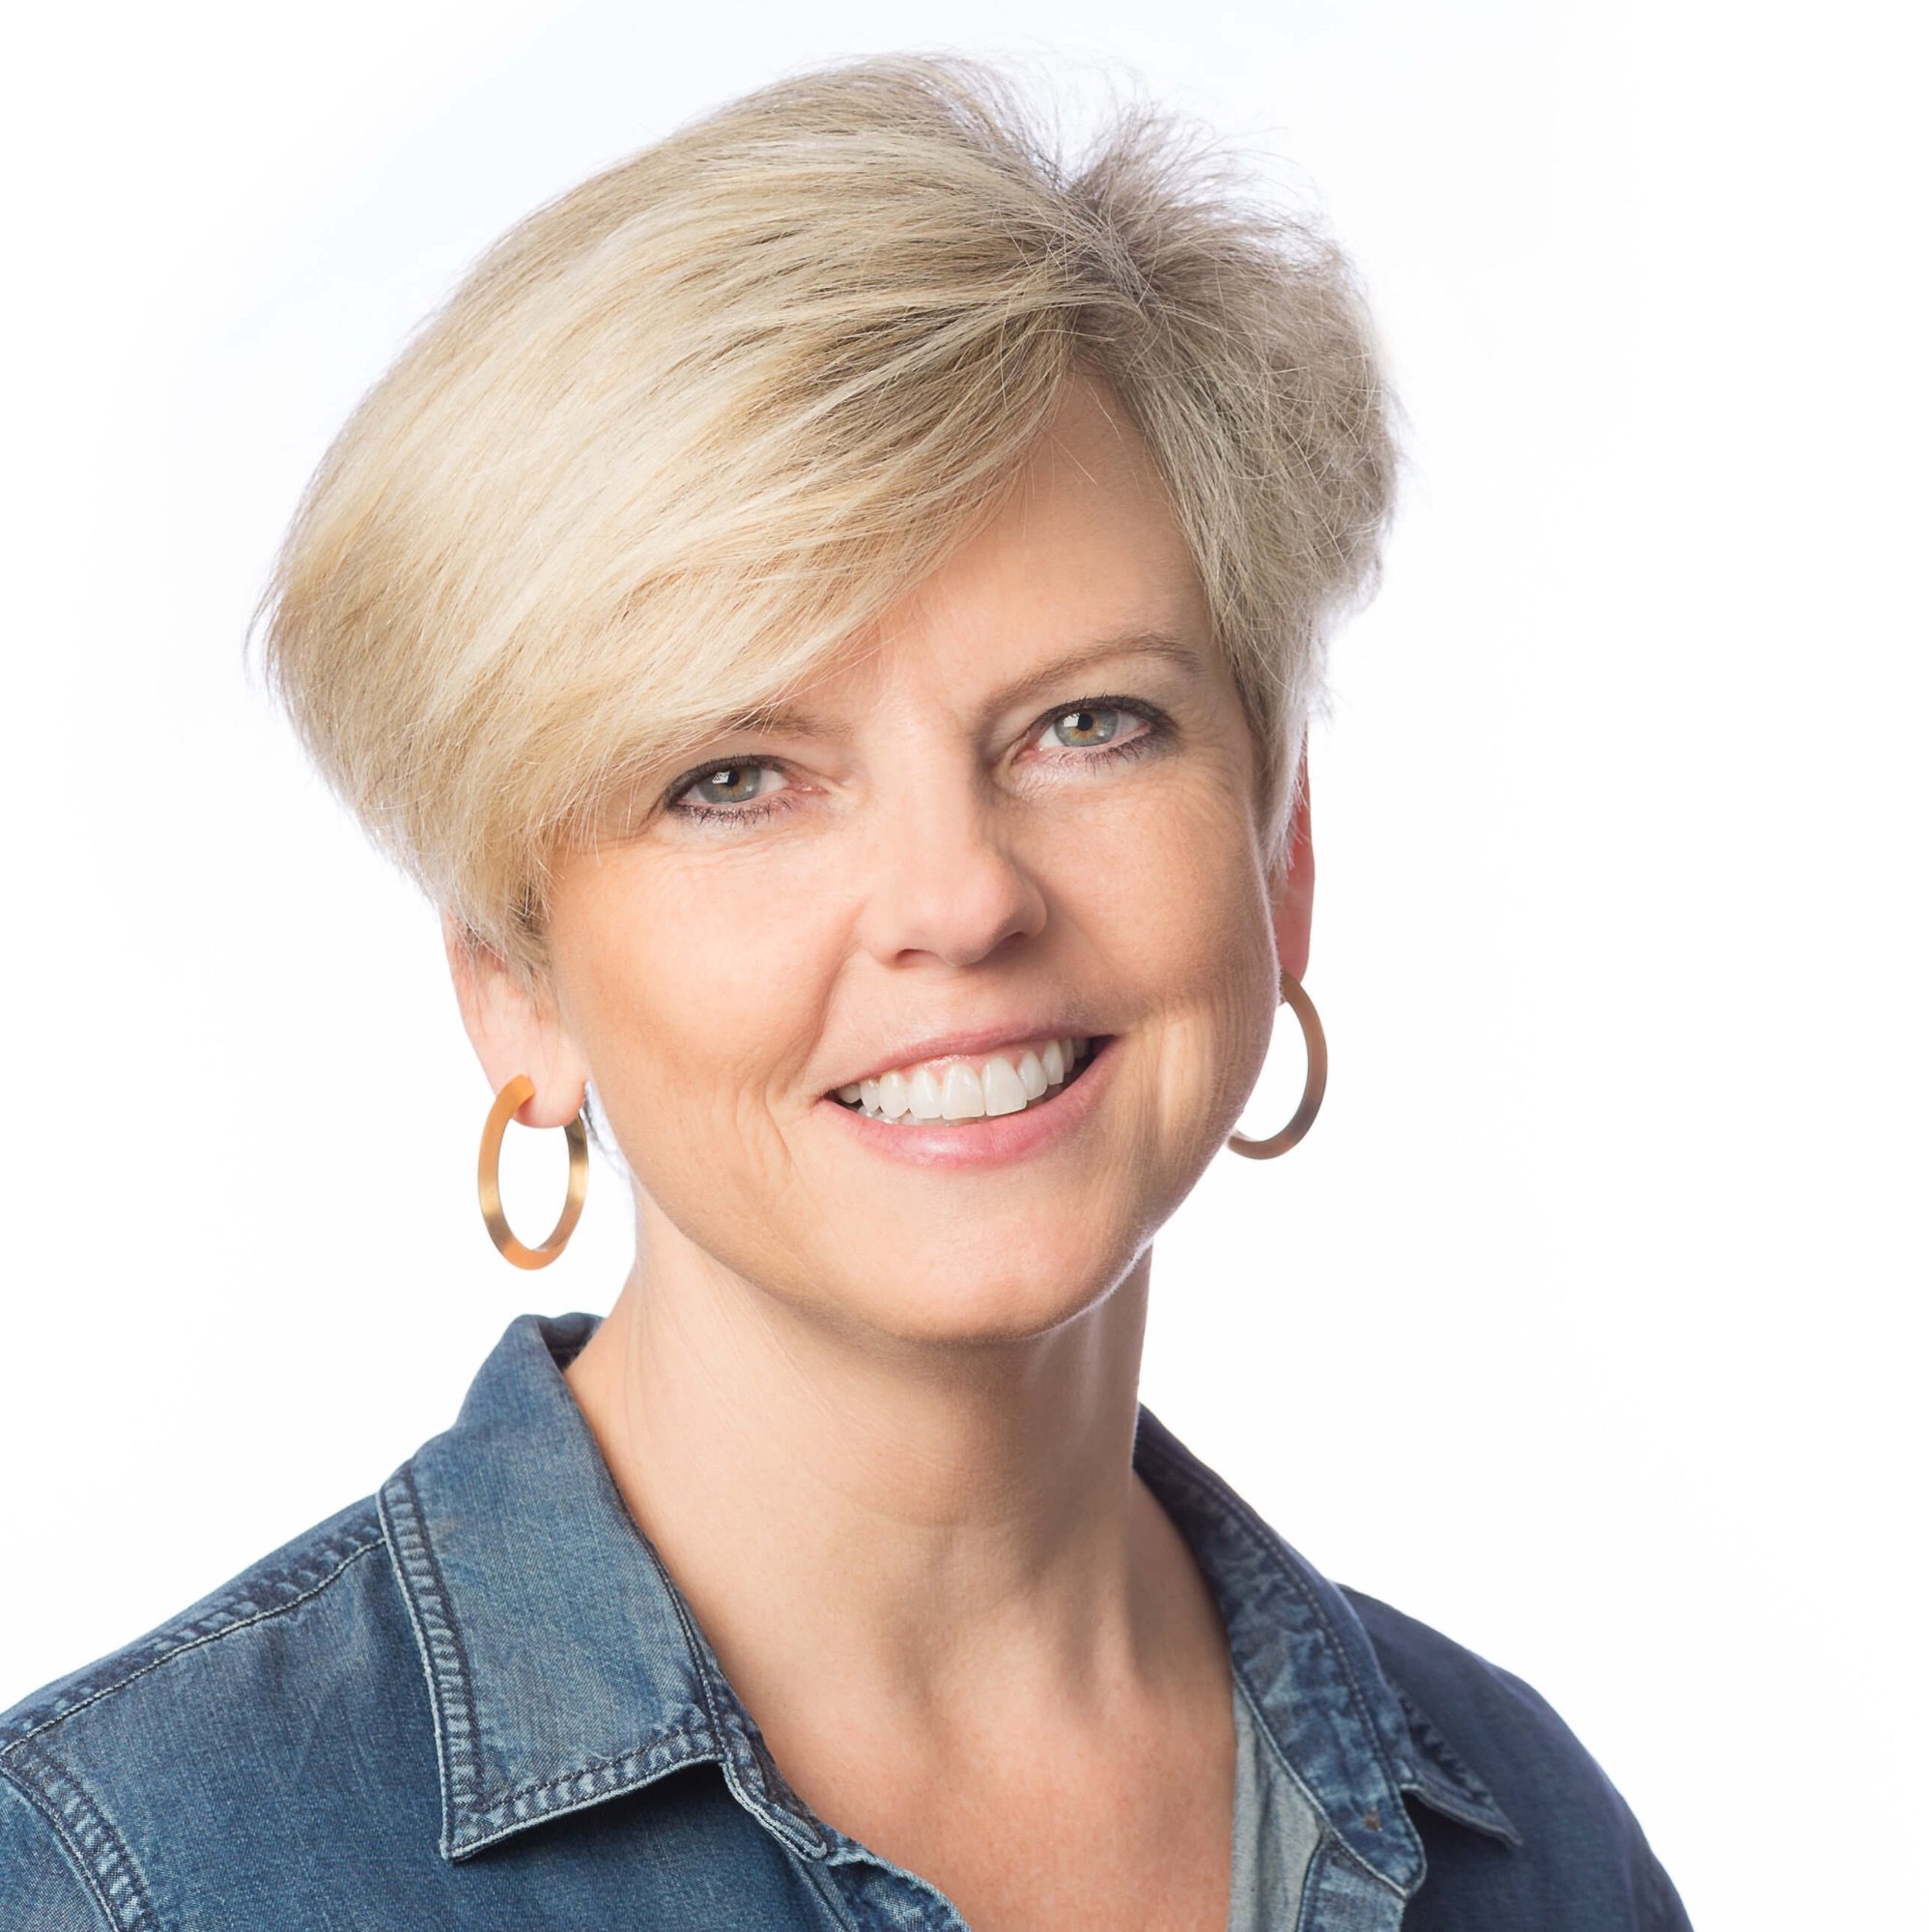 Dr Pamela Crooke. PhD, CCC-SLP  is Chief Curriculum Officer andÂ  Co-developer of the Social ThinkingÂ® Methodology. She has developed the Social Thinking Methodology with the founder Michelle Garcia Winner. ...read more